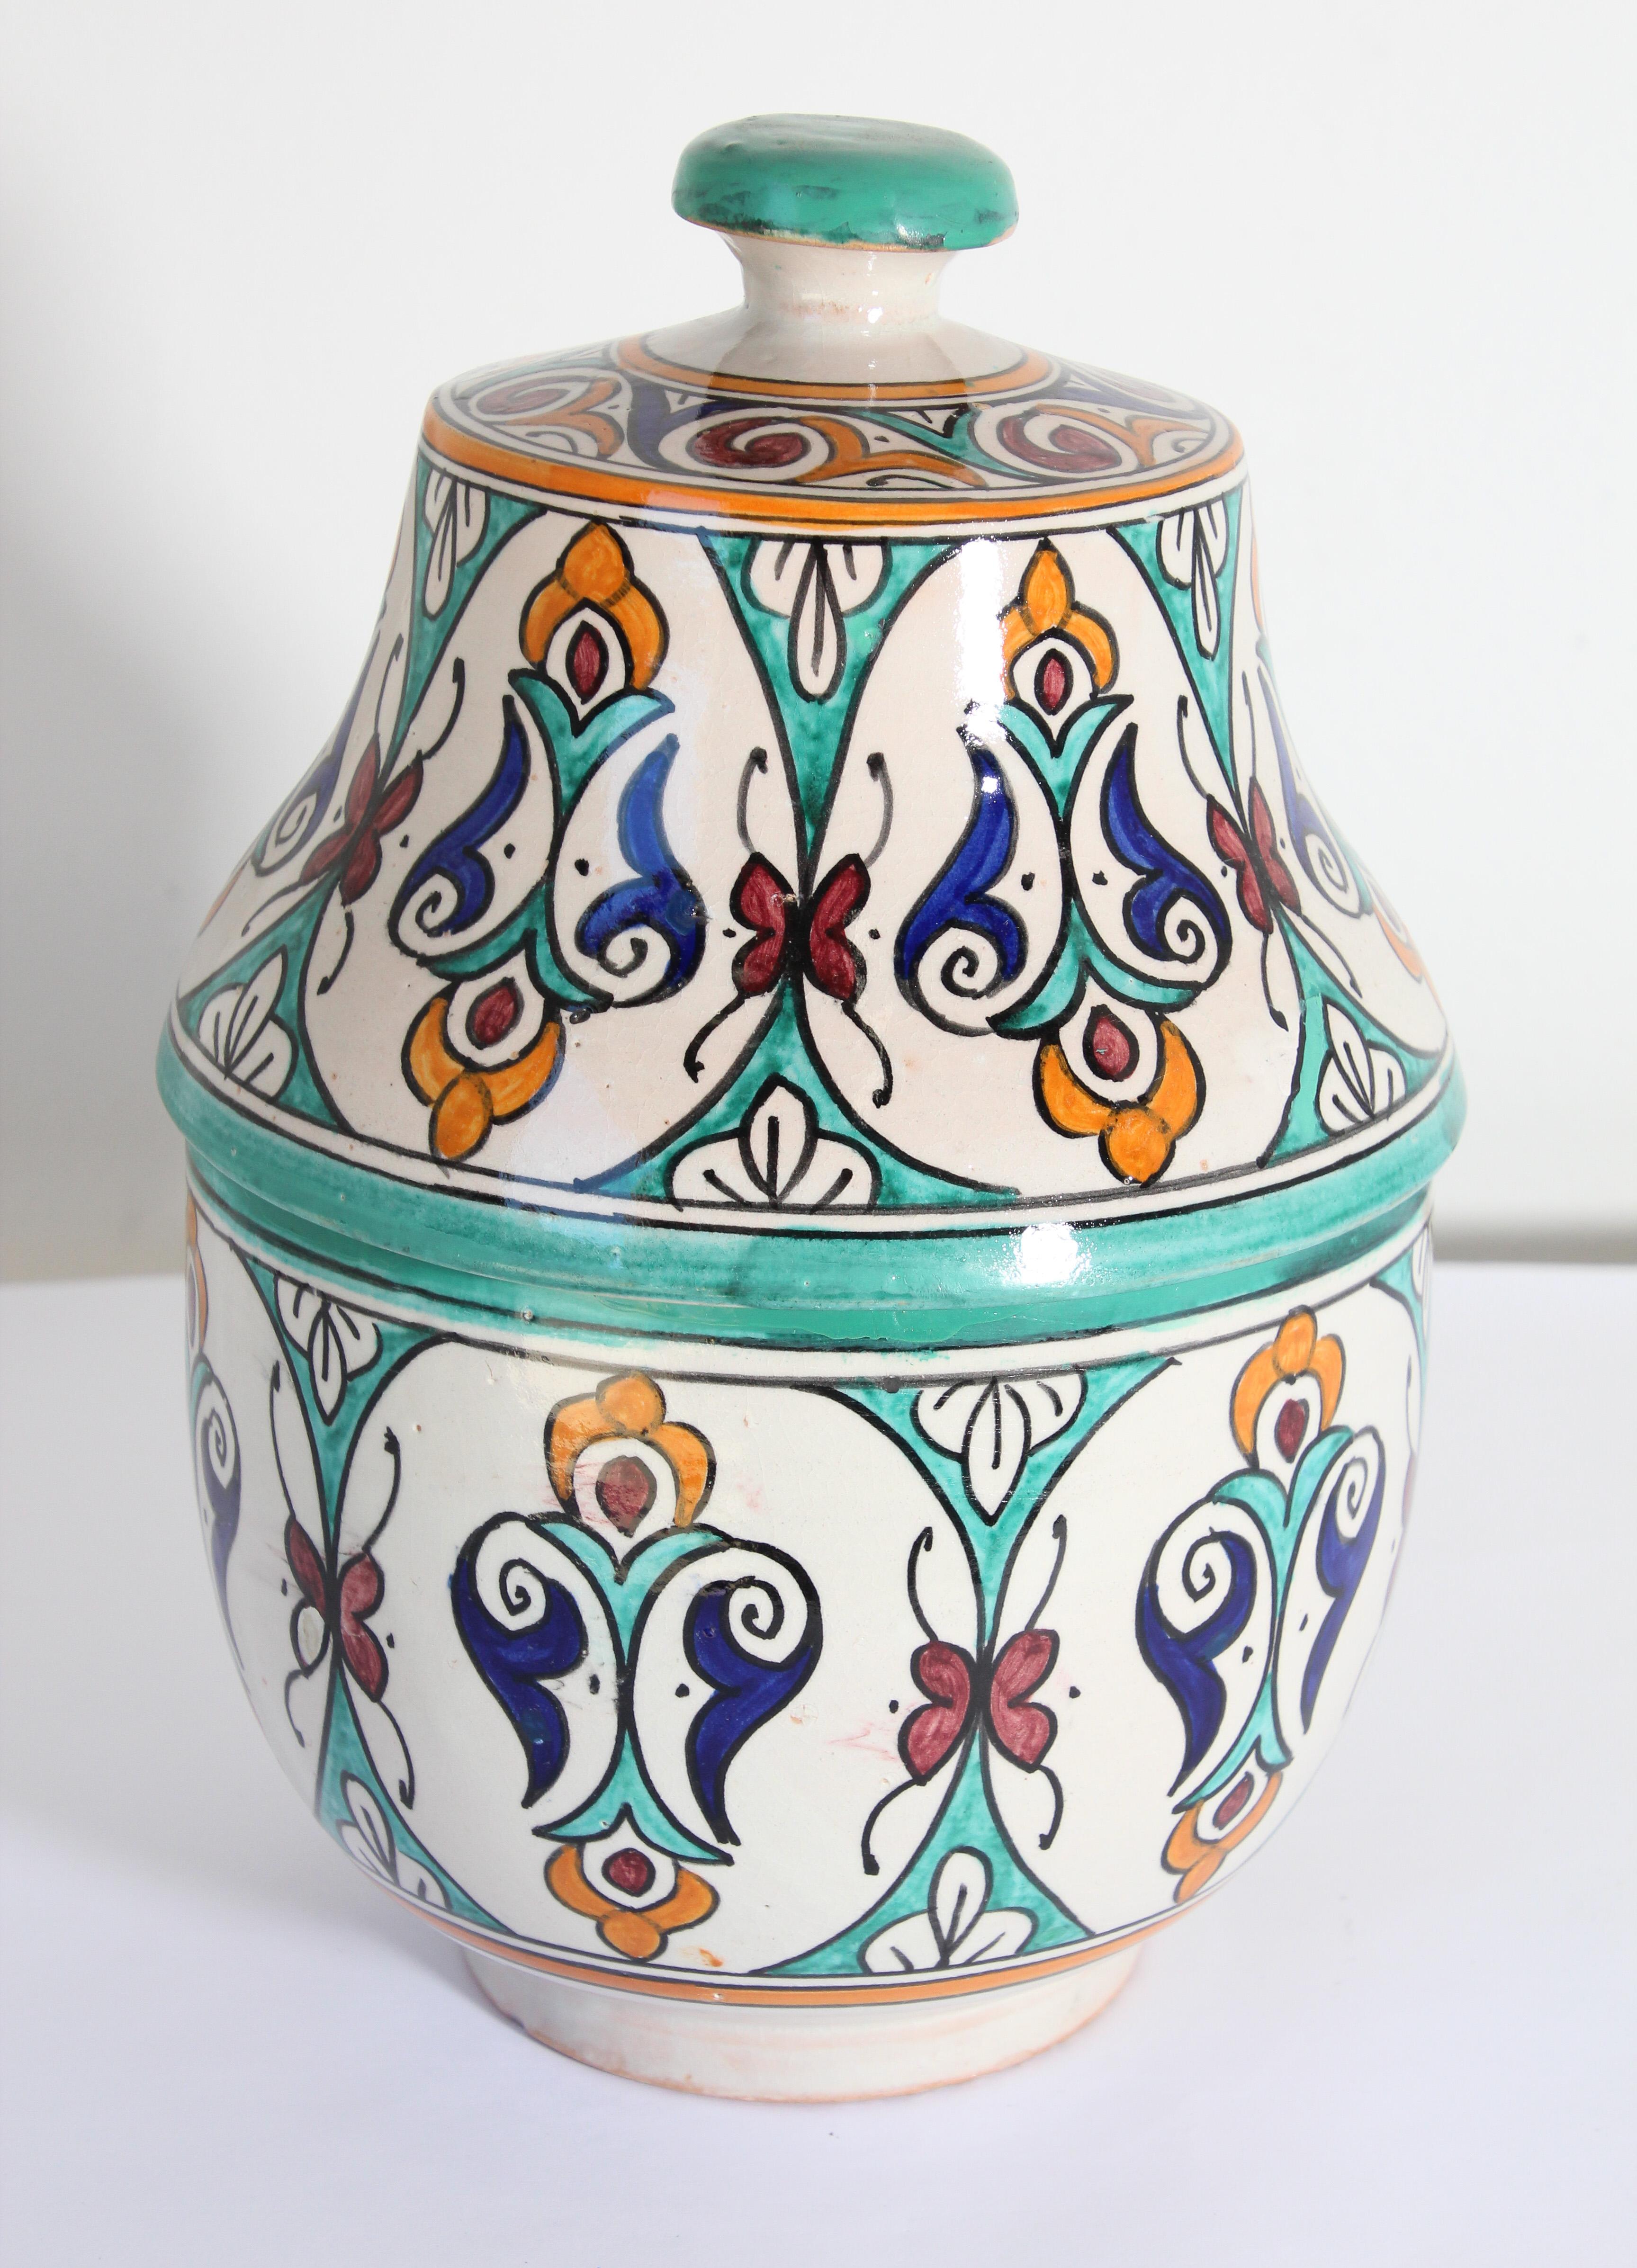 Moroccan Glazed Moorish Ceramic Covered Jar Handcrafted in Fez Morocco For Sale